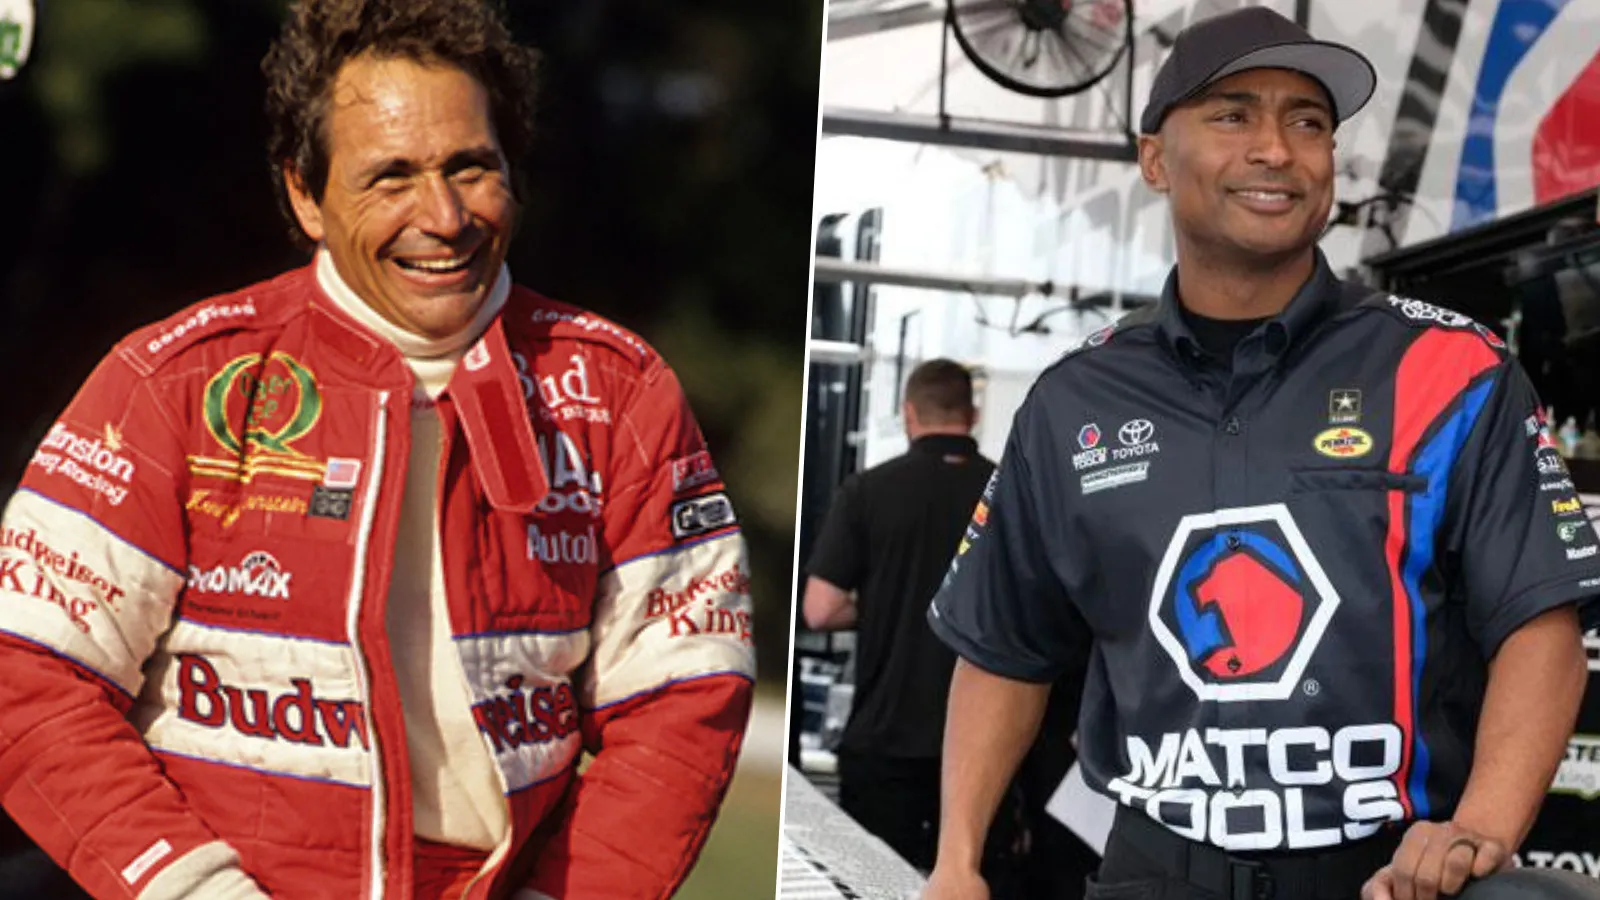 NHRA Legend Kenny Bernstein To Warm-Up Antron Brown's Top Fuel Dragster At Mile-High Nationals | Drag Illustrated | Drag Racing News, Interviews, Photos, Videos and More